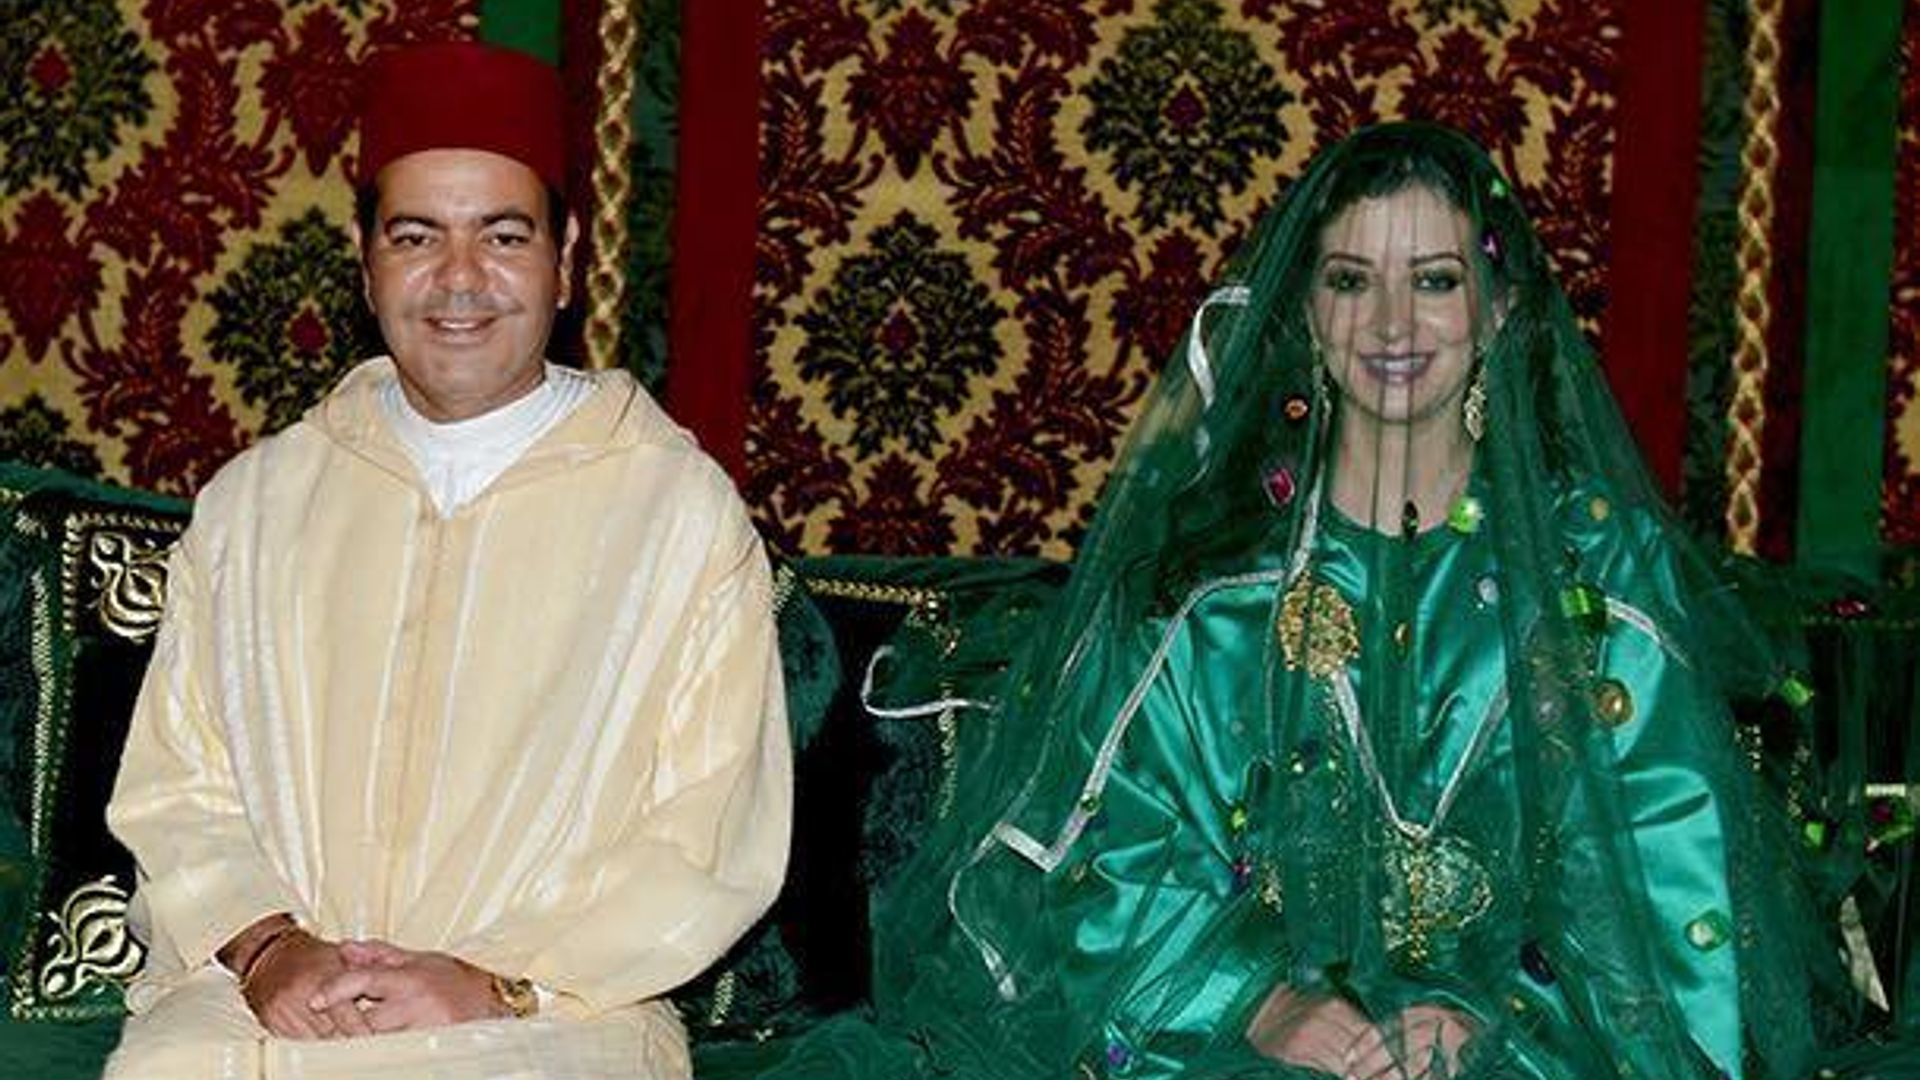 Royal Moroccan wedding: Prince Moulay Rachid marries in colorful ceremony